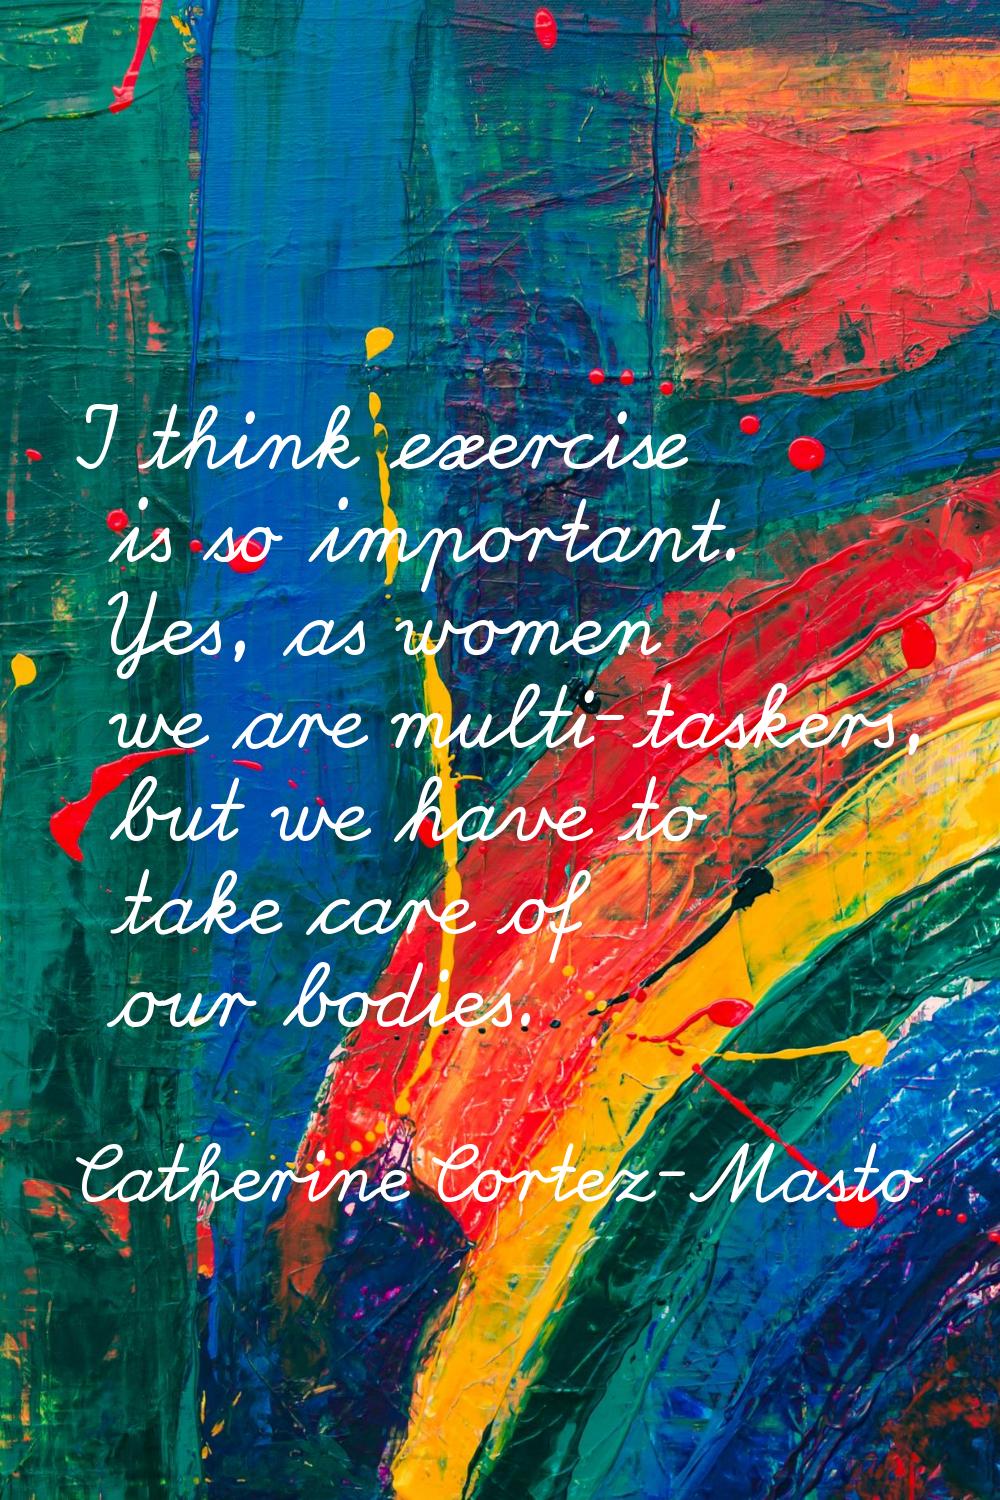 I think exercise is so important. Yes, as women we are multi-taskers, but we have to take care of o